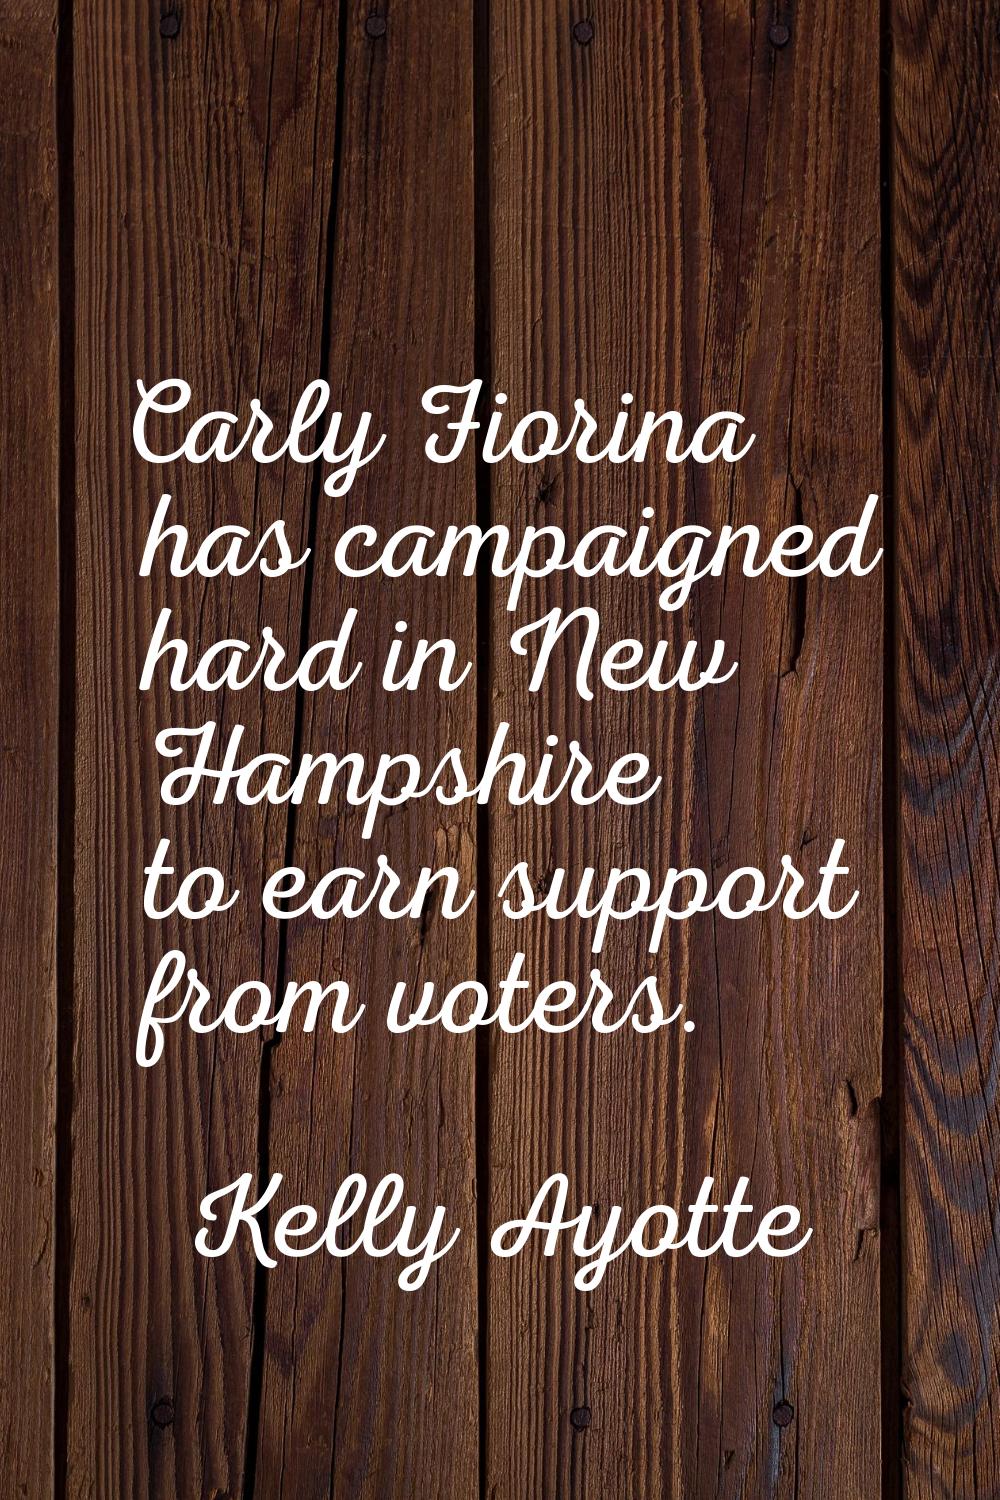 Carly Fiorina has campaigned hard in New Hampshire to earn support from voters.